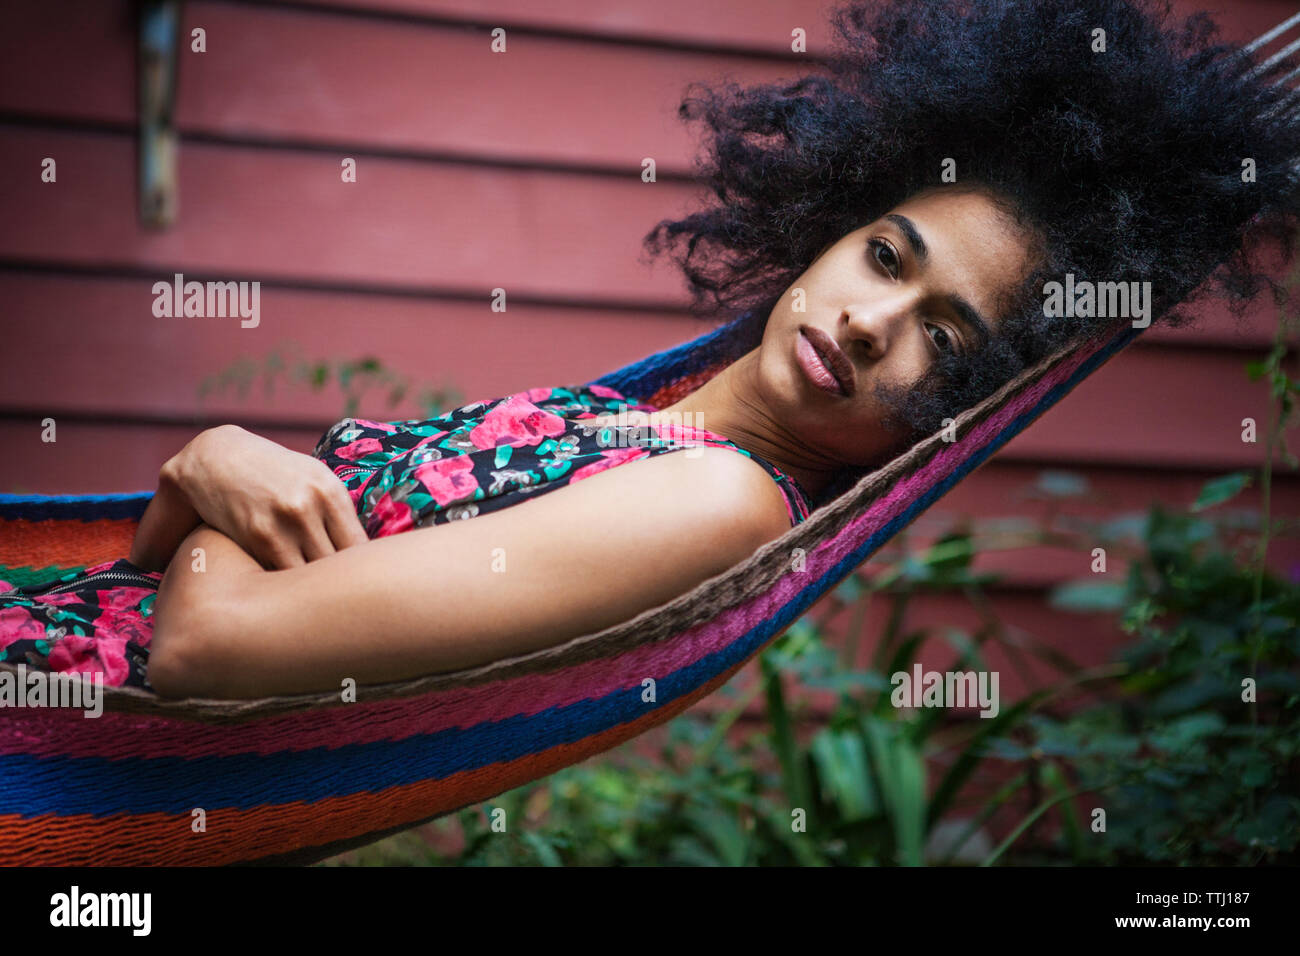 Woman with arms crossed relaxing on hammock in lawn Stock Photo